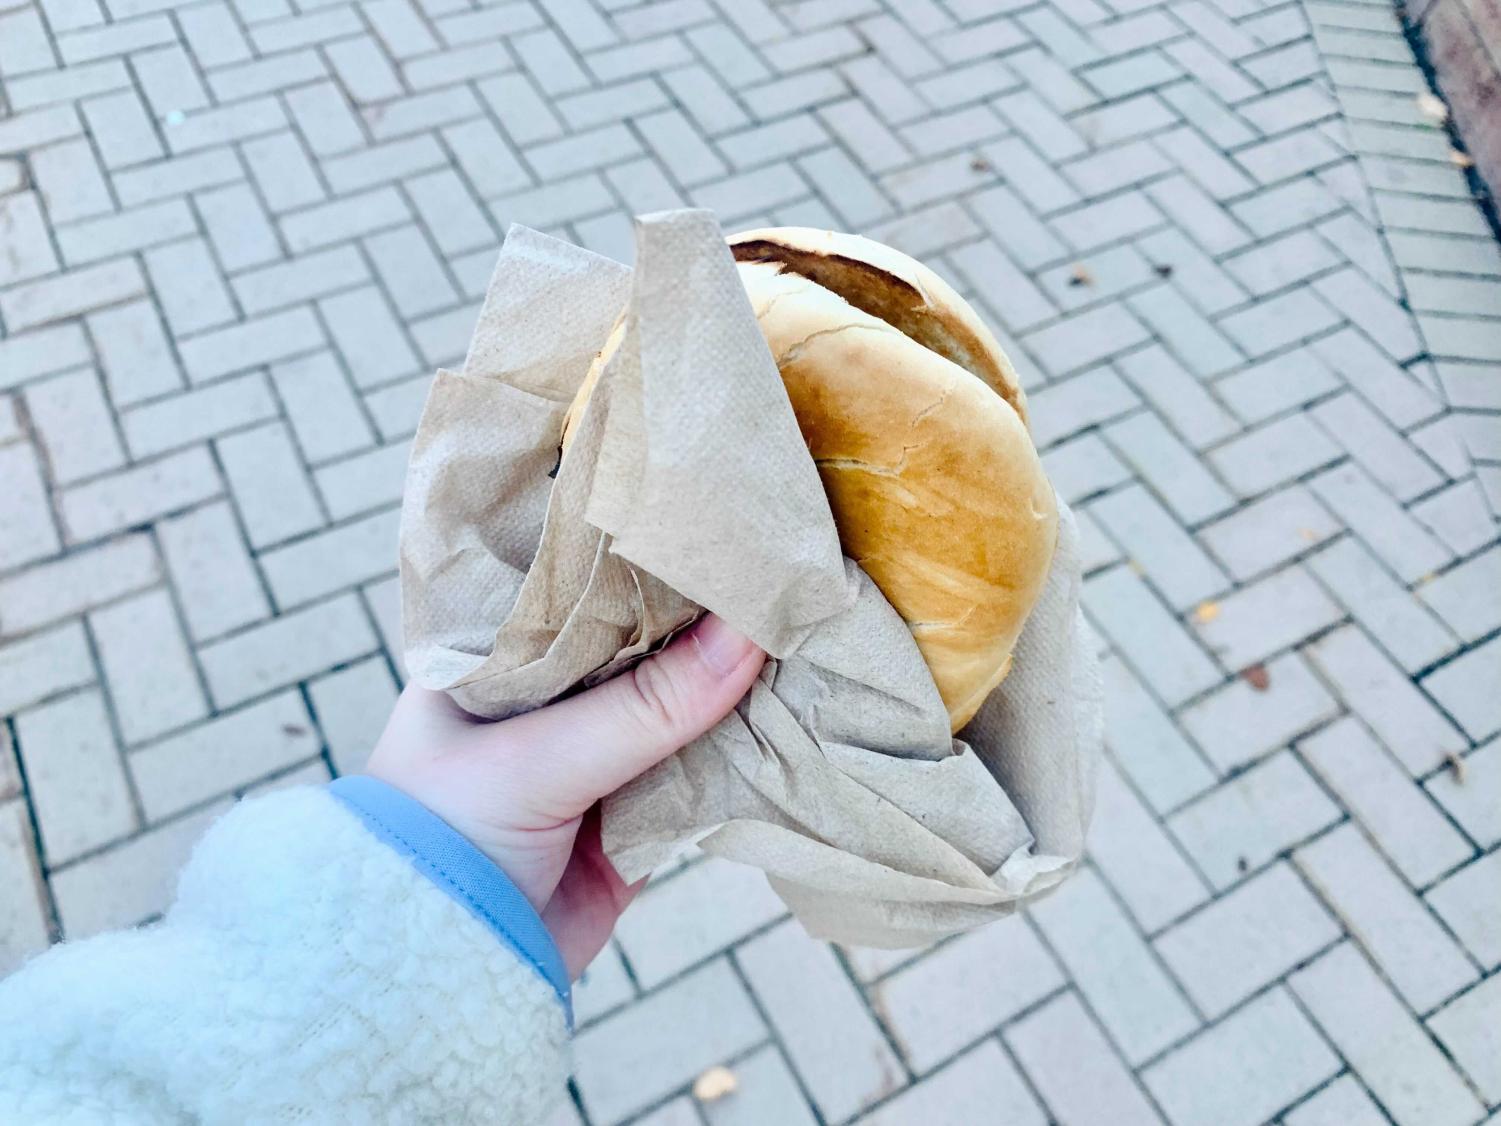 Taking a bagel from the IDX Dining Hall outside. Photo by: Katherine Townsend.